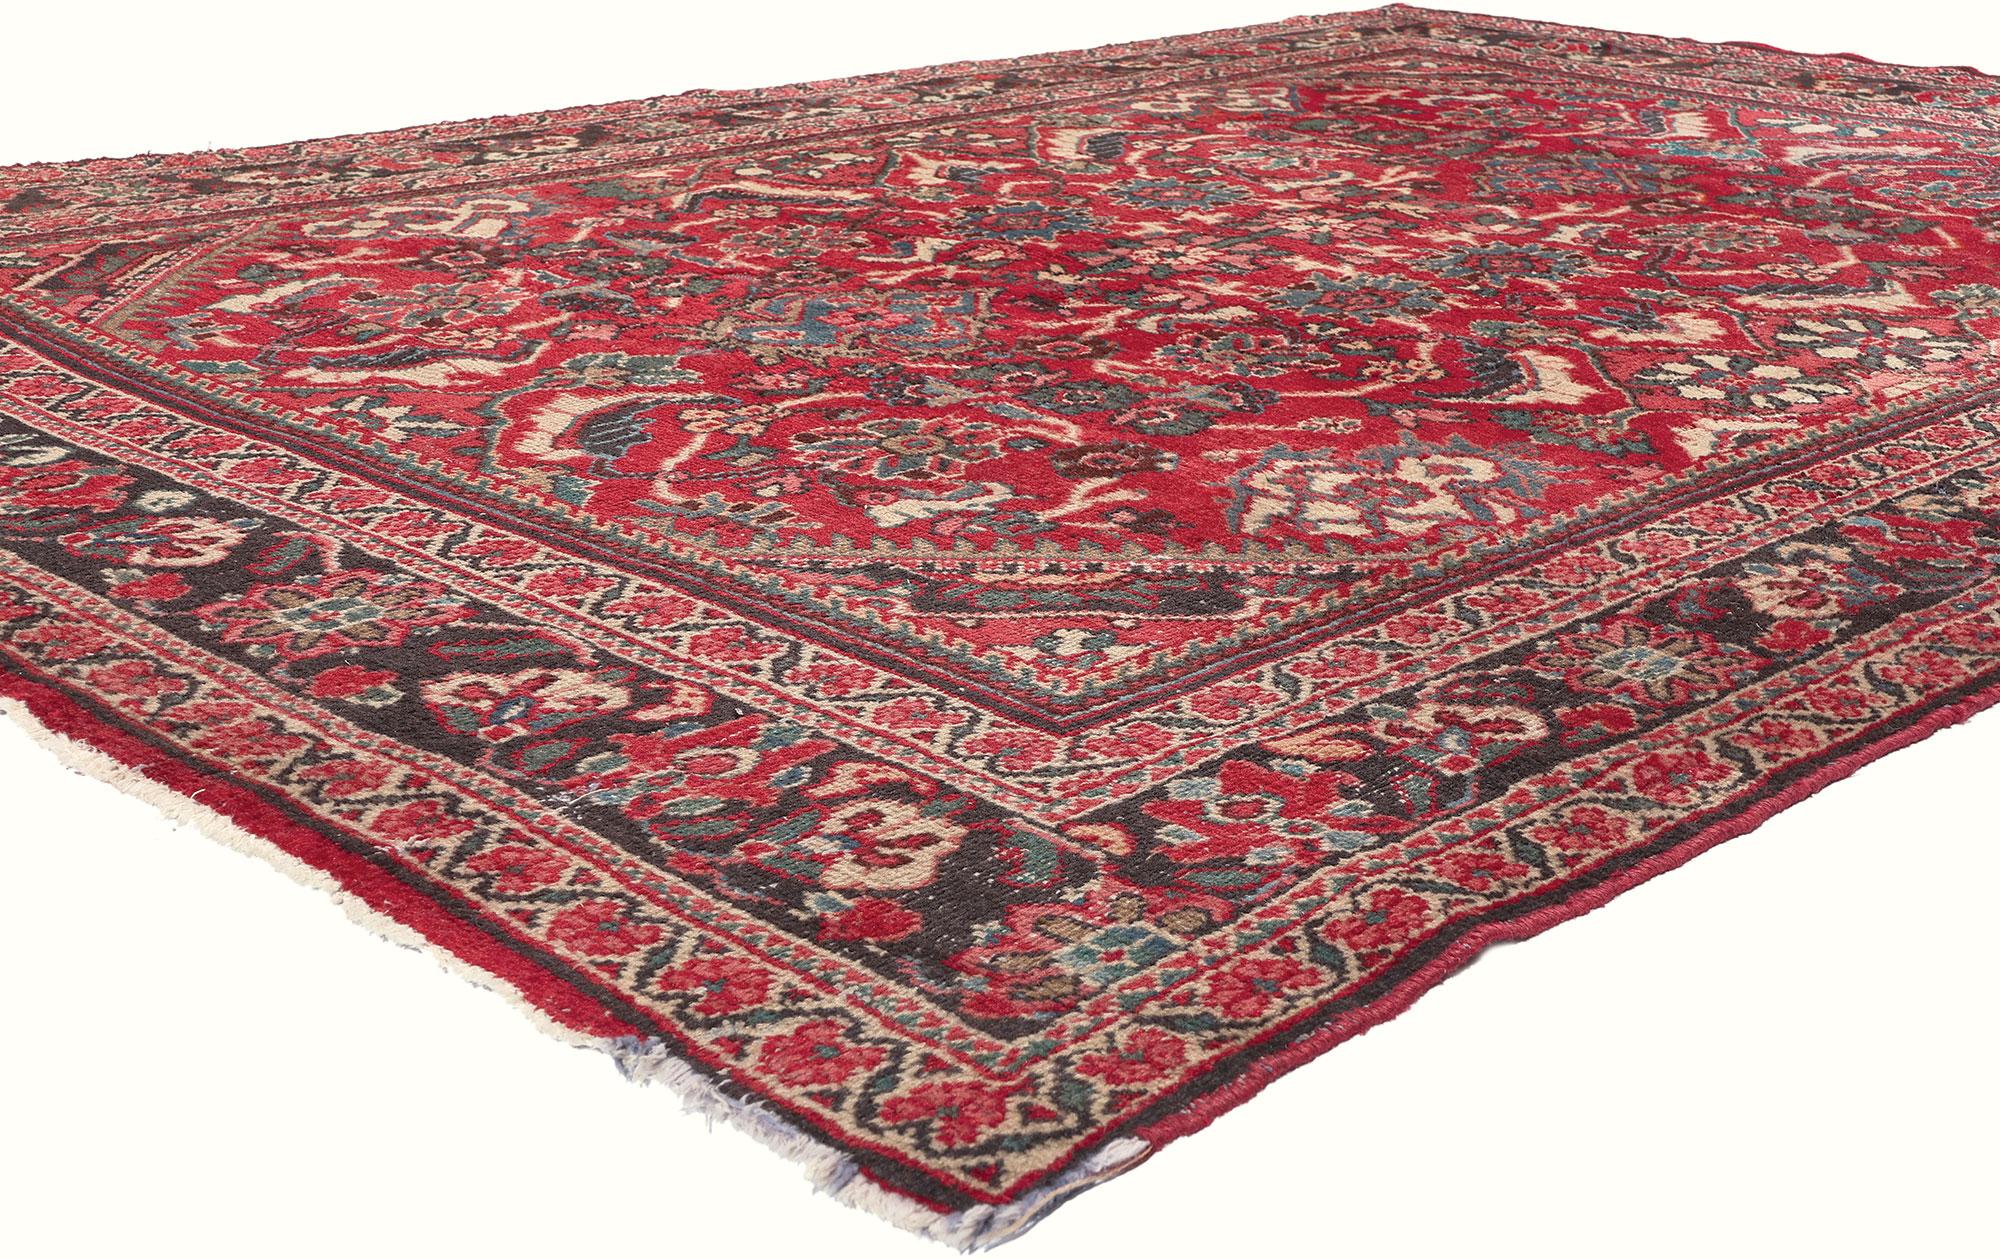 78715 Vintage Red Persian Mahal Rug, 07'02 x 10'02. Originating from Iran's Mahallat region in central Northwestern Iran, Persian Mahal rugs stand as exquisite examples of unparalleled craftsmanship and distinctive design. These rugs are celebrated